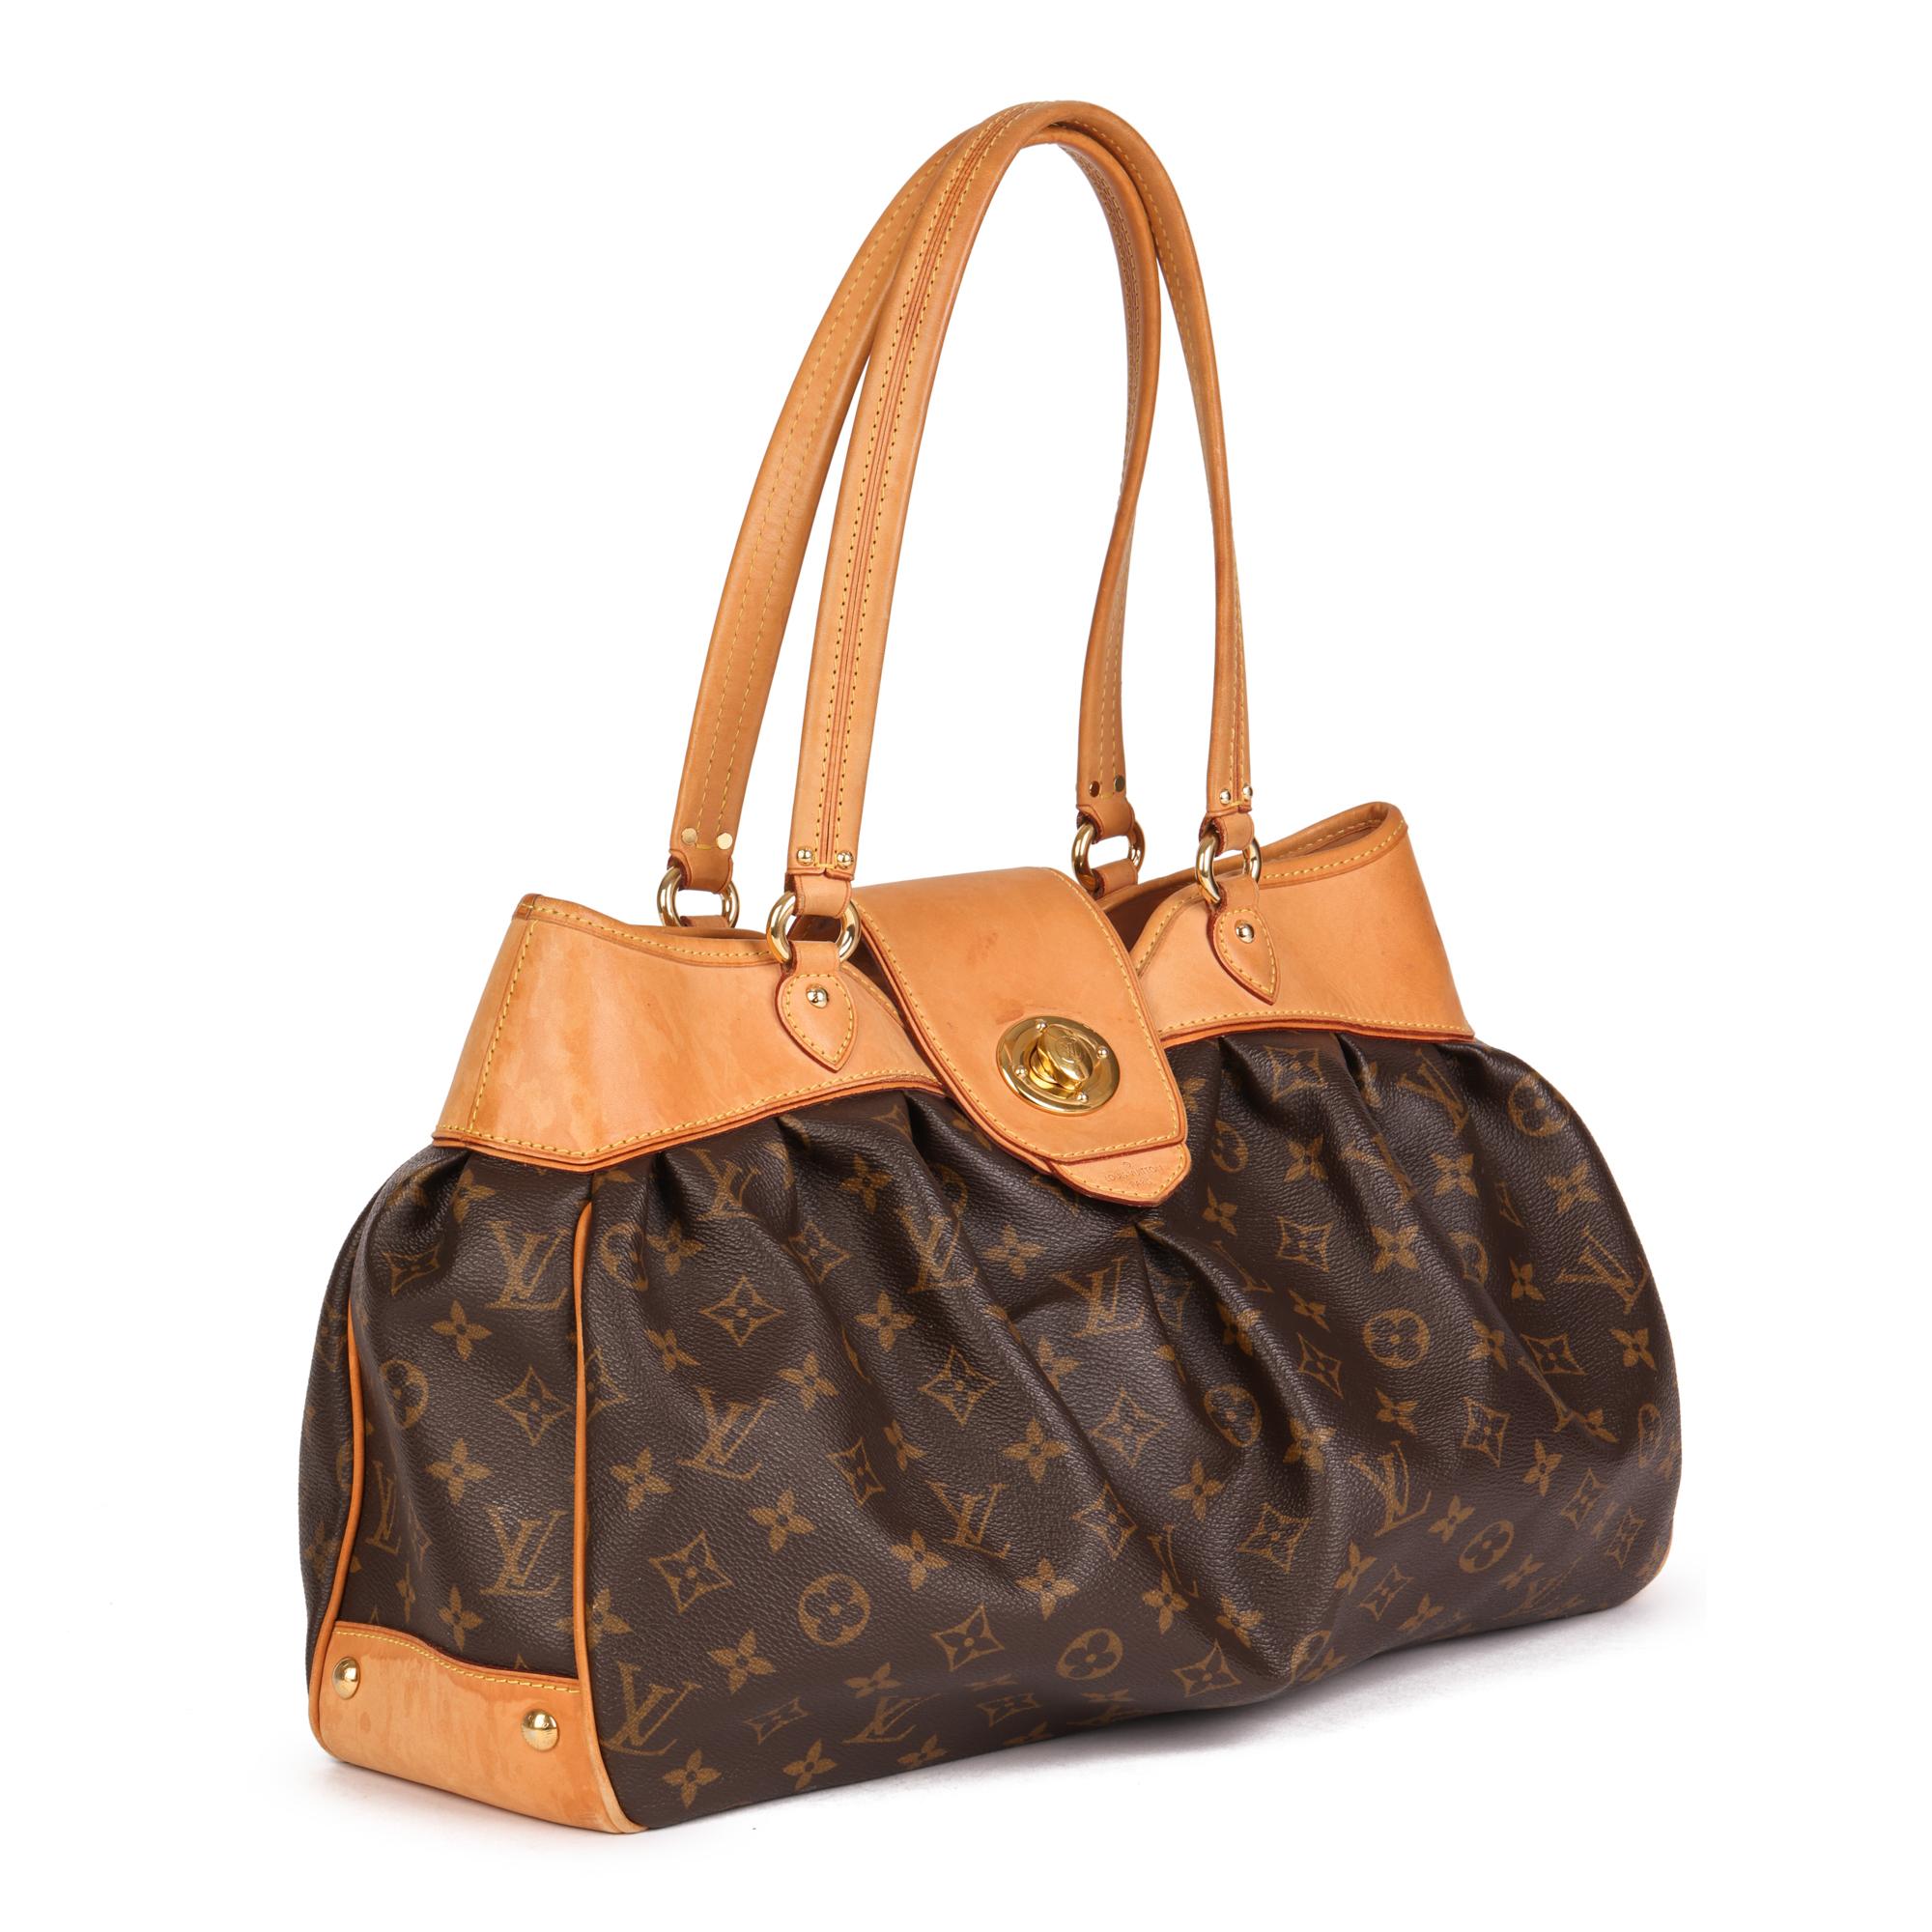 LOUIS VUITTON
Brown Monogram Coated Canvas & Vachetta Leather Boetie

Xupes Reference: CB552
Serial Number: MI2009
Age (Circa): 2009
Authenticity Details: Date Stamp (Made in France)
Gender: Ladies
Type: Tote, Shoulder

Colour: Brown
Hardware: